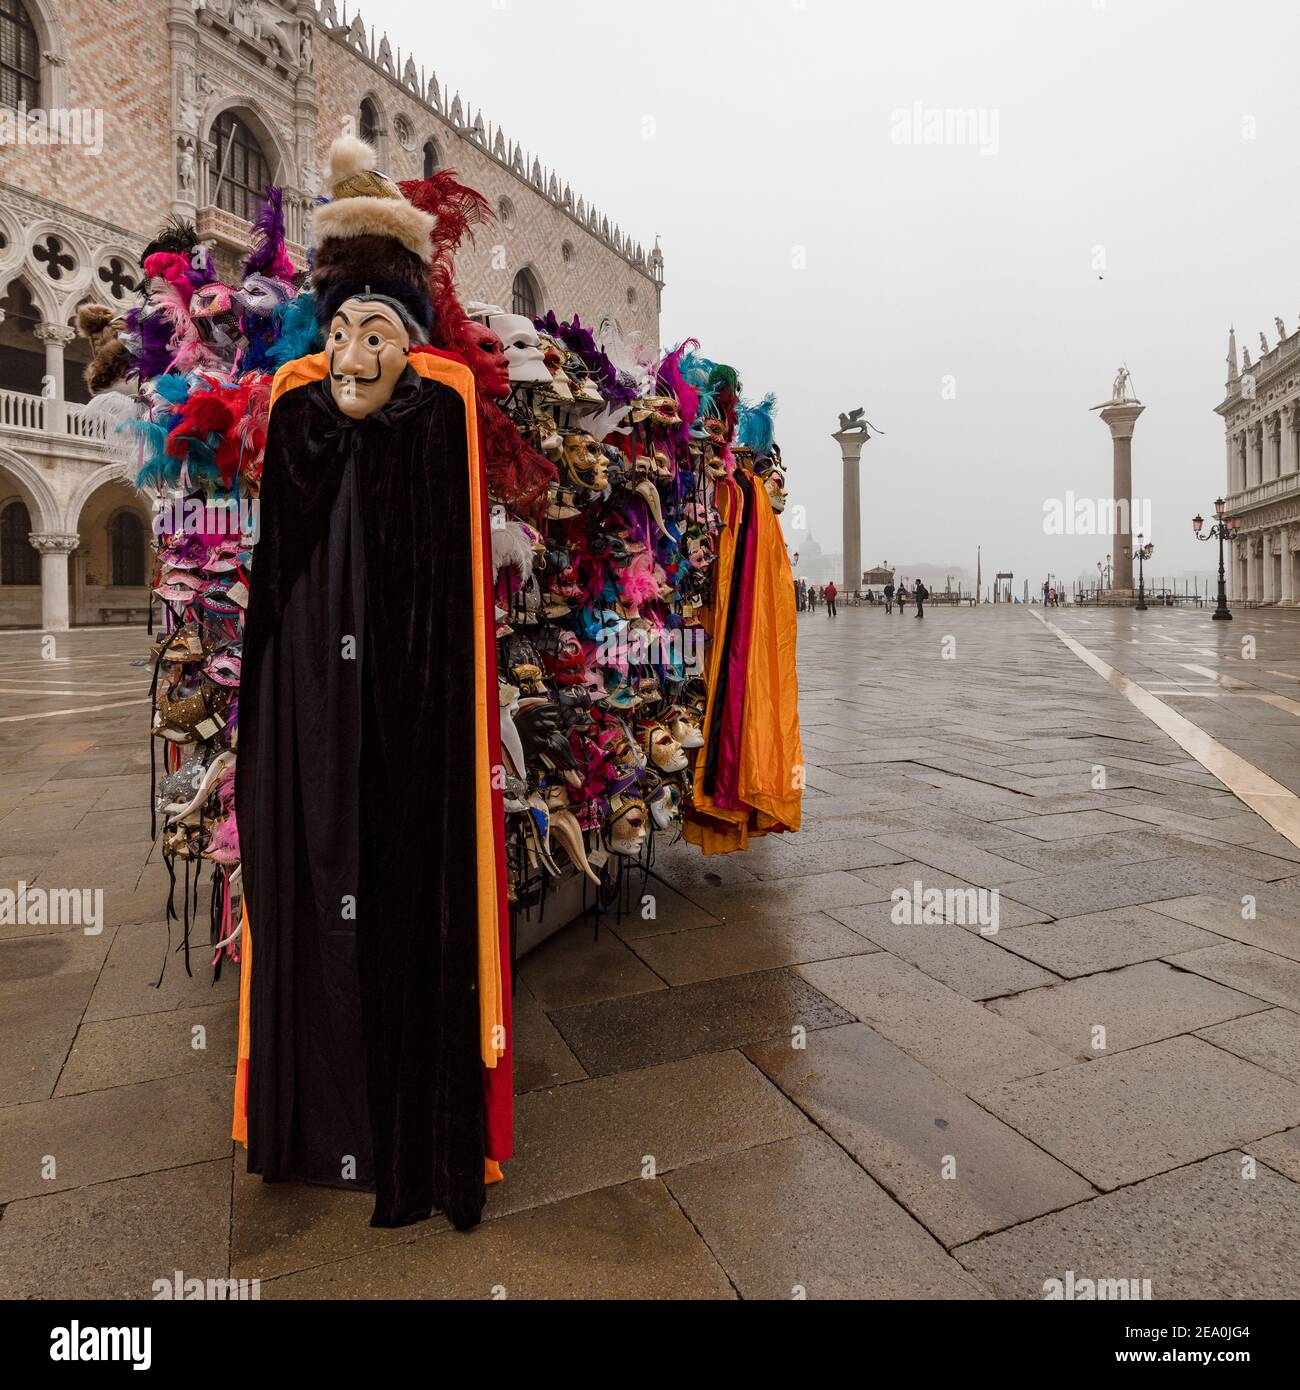 Deserted Piazza San Marco with costume stall at Carnival time 2021 Stock Photo